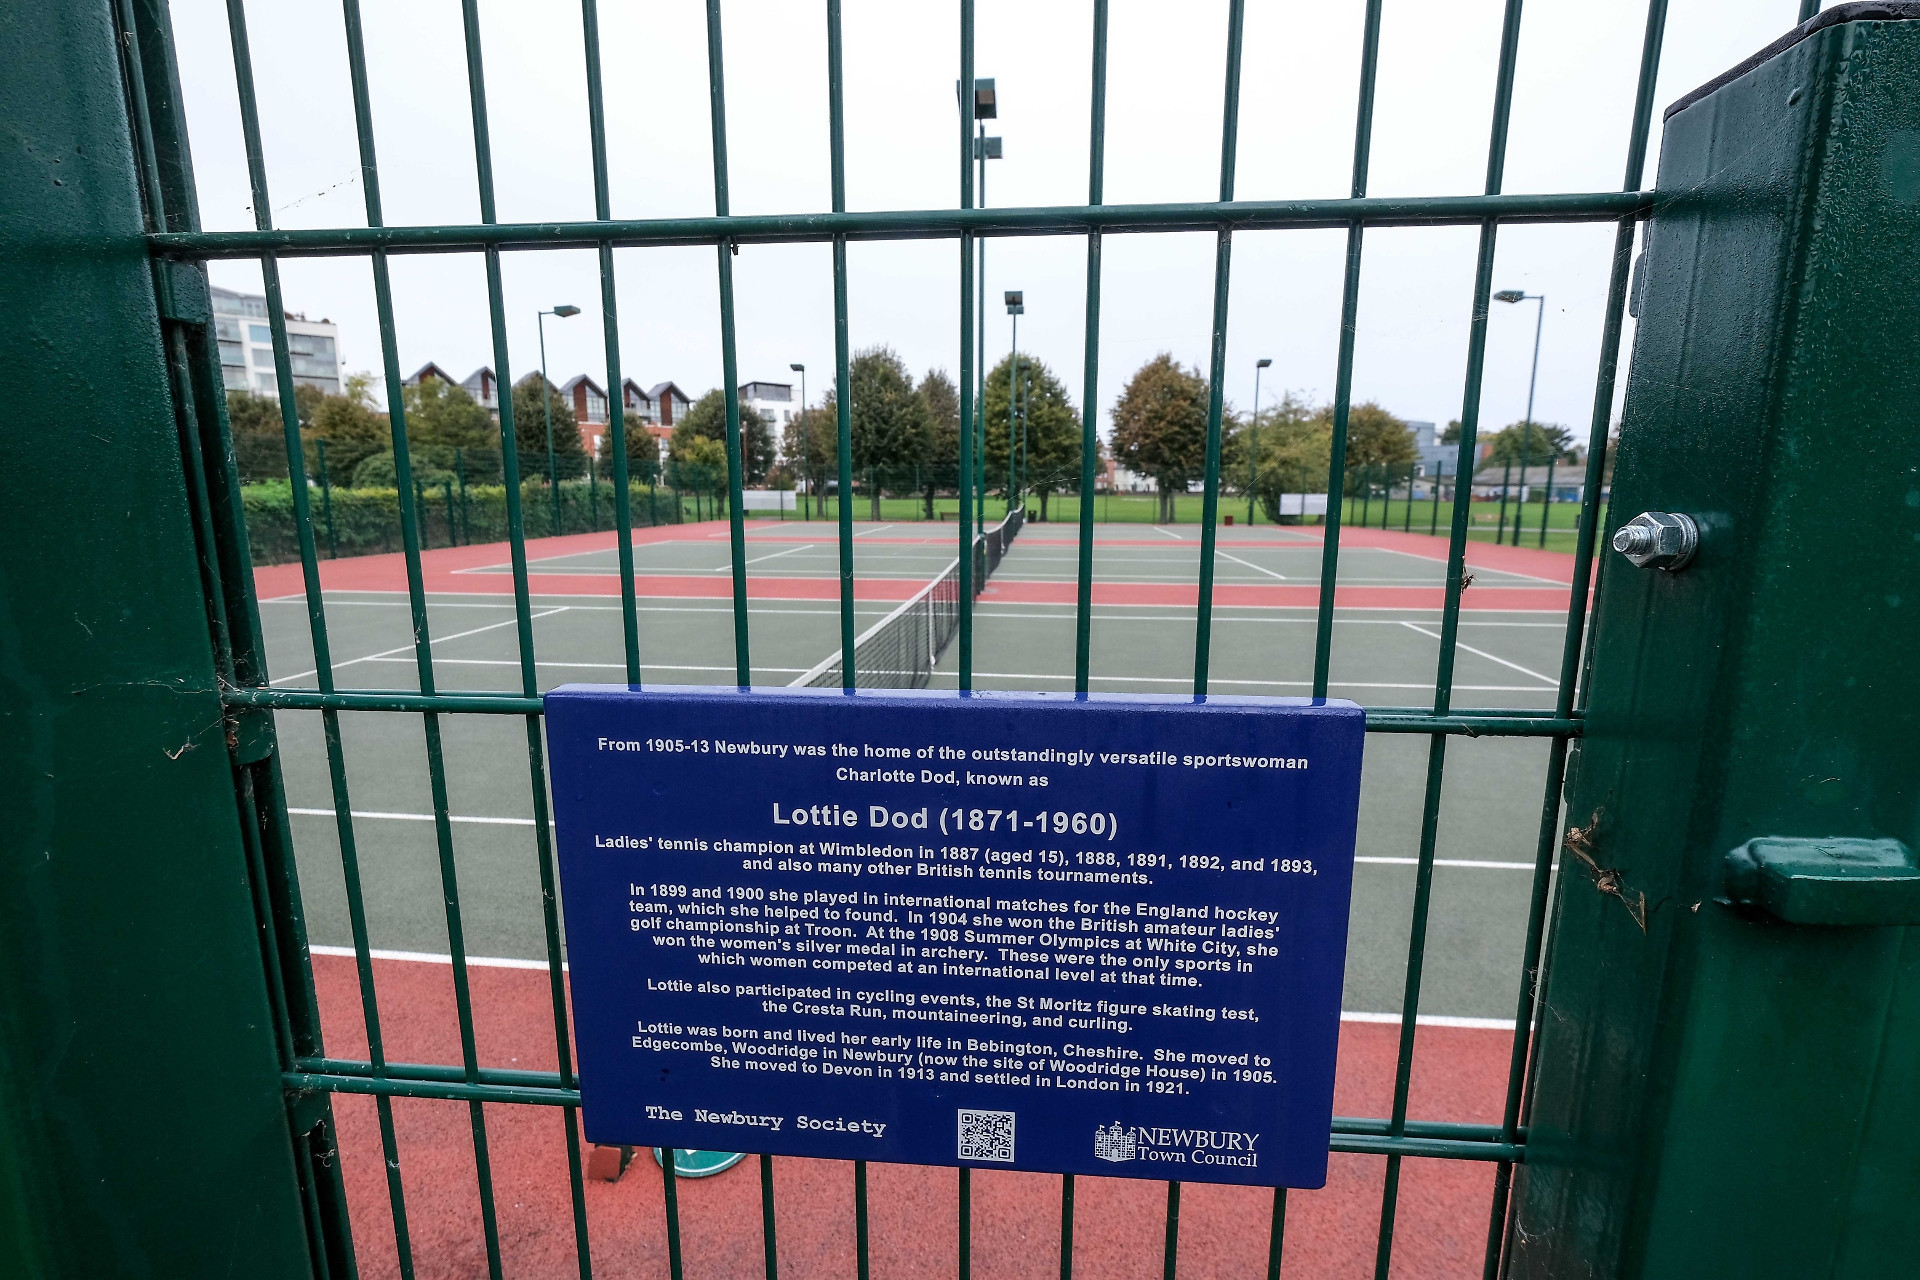 A blue plaque has been unveiled in Newbury in honour of Lottie Dod, a five-time Wimbledon champion and Olympic archery silver medallist, who used to live in the area ©Newbury Town Council 